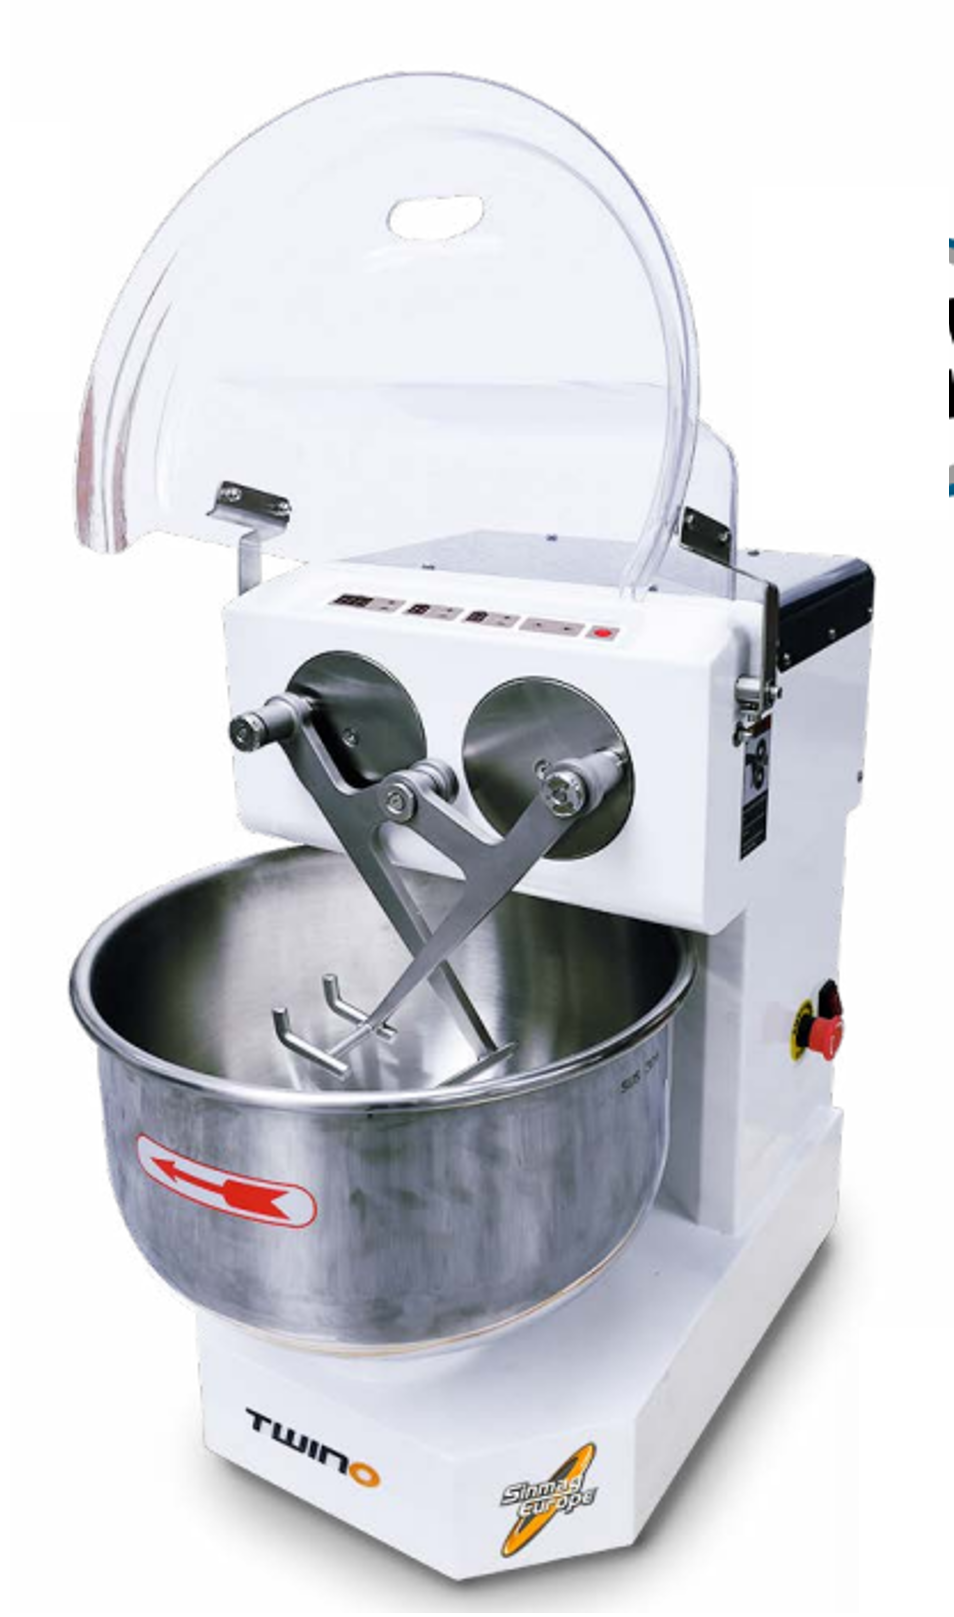 Sinmag 12kg Twin Arm Mixer